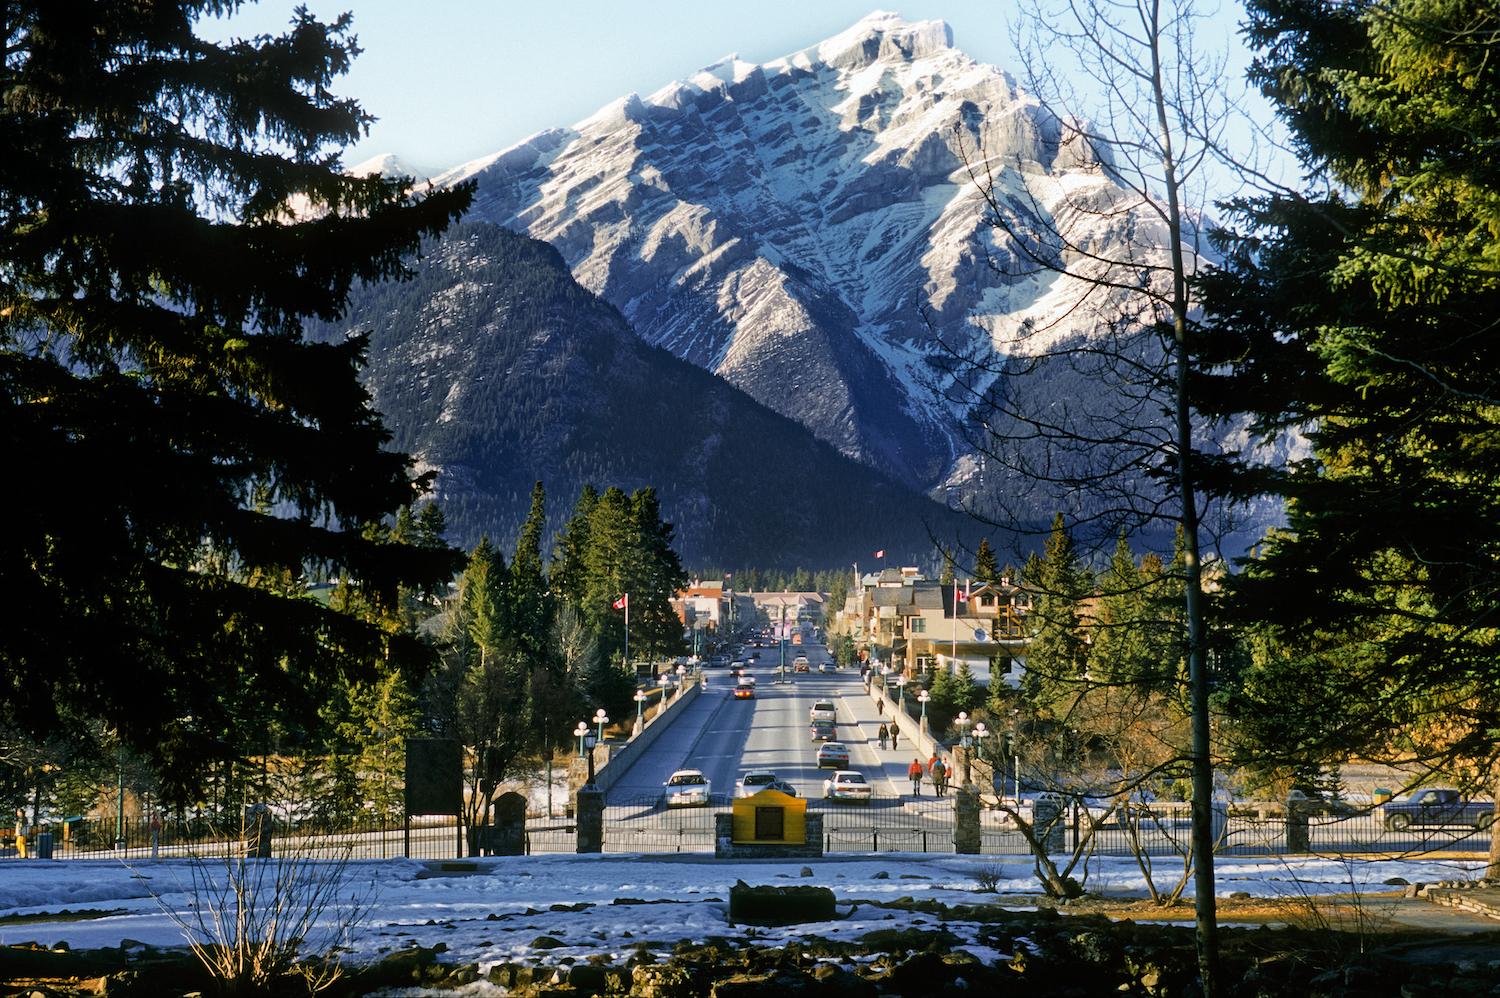 Banff Avenue in the town of Banff is shown in front of Banff National Park's Cascade Mountain.